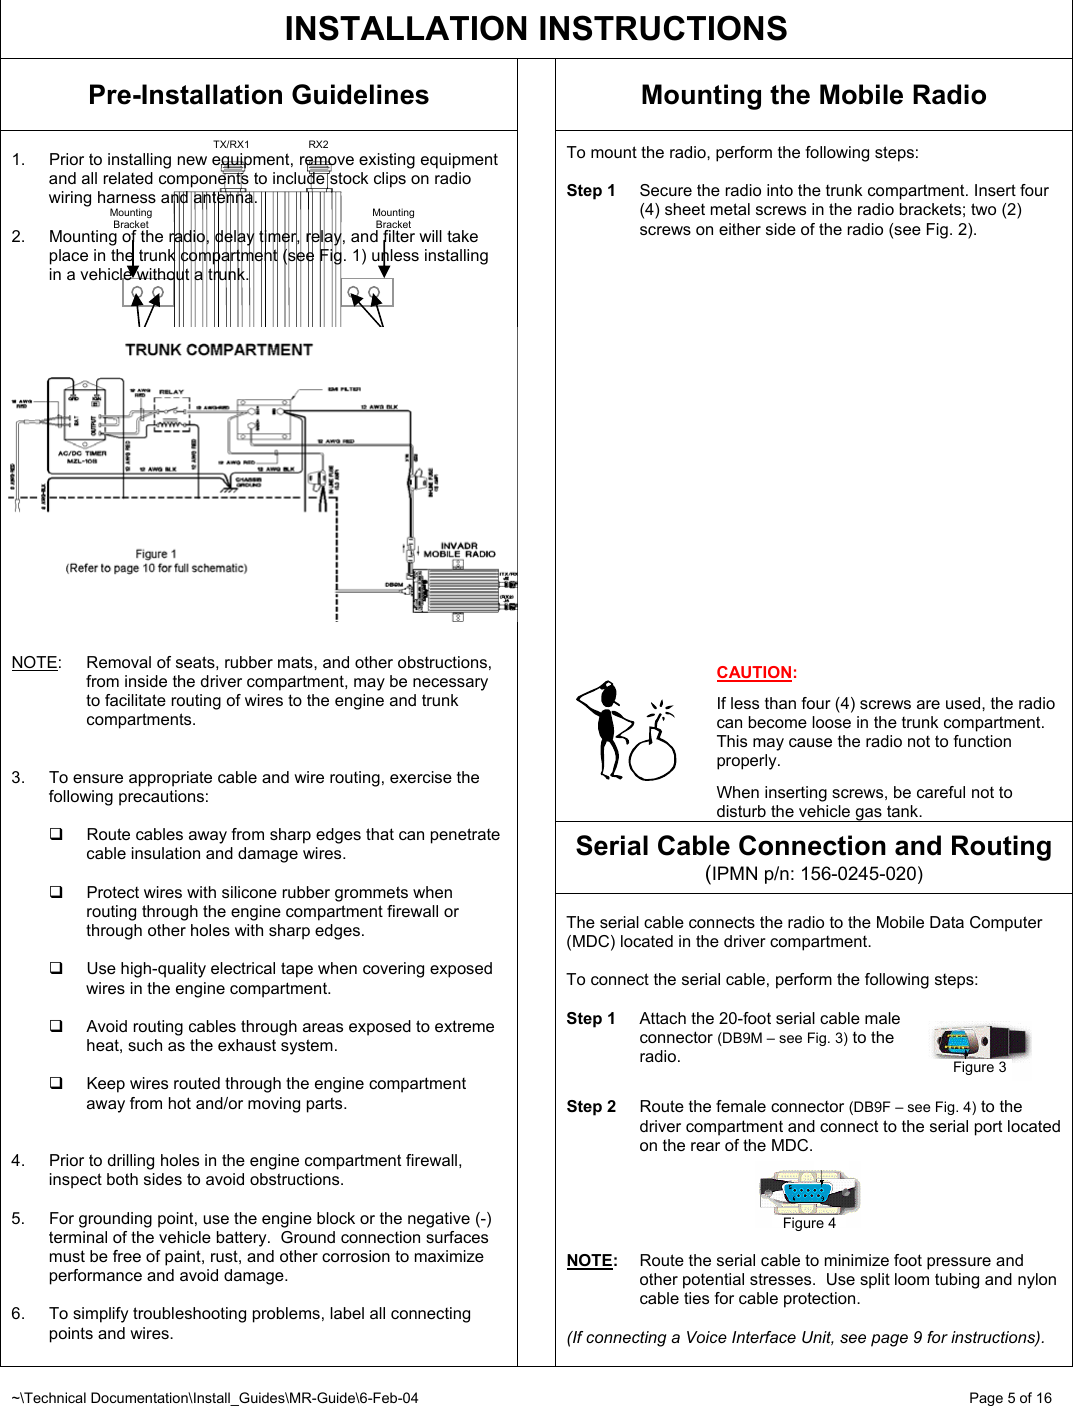 ~\Technical Documentation\Install_Guides\MR-Guide\6-Feb-04   Page 5 of 16 2 sheet metal screws  Mounting Bracket  TX/RX1  RX2 Mounting Bracket      TX FCC ID                             M17-EC8DT450TX xxxxxxxxxxxx2 sheet metal screws  Figure 2   INSTALLATION INSTRUCTIONS Pre-Installation Guidelines  Mounting the Mobile Radio  To mount the radio, perform the following steps:   Step 1  Secure the radio into the trunk compartment. Insert four (4) sheet metal screws in the radio brackets; two (2) screws on either side of the radio (see Fig. 2).                       CAUTION:  If less than four (4) screws are used, the radio can become loose in the trunk compartment.  This may cause the radio not to function properly.   When inserting screws, be careful not to disturb the vehicle gas tank. Serial Cable Connection and Routing (IPMN p/n: 156-0245-020)  1.  Prior to installing new equipment, remove existing equipment and all related components to include stock clips on radio wiring harness and antenna.  2.  Mounting of the radio, delay timer, relay, and filter will take place in the trunk compartment (see Fig. 1) unless installing in a vehicle without a trunk.     NOTE: Removal of seats, rubber mats, and other obstructions, from inside the driver compartment, may be necessary to facilitate routing of wires to the engine and trunk compartments.   3.  To ensure appropriate cable and wire routing, exercise the following precautions:    Route cables away from sharp edges that can penetrate cable insulation and damage wires.    Protect wires with silicone rubber grommets when routing through the engine compartment firewall or through other holes with sharp edges.   Use high-quality electrical tape when covering exposed wires in the engine compartment.    Avoid routing cables through areas exposed to extreme heat, such as the exhaust system.    Keep wires routed through the engine compartment away from hot and/or moving parts.   4.  Prior to drilling holes in the engine compartment firewall, inspect both sides to avoid obstructions.  5.  For grounding point, use the engine block or the negative (-) terminal of the vehicle battery.  Ground connection surfaces must be free of paint, rust, and other corrosion to maximize performance and avoid damage.  6.  To simplify troubleshooting problems, label all connecting points and wires.     The serial cable connects the radio to the Mobile Data Computer (MDC) located in the driver compartment.  To connect the serial cable, perform the following steps:  Step 1  Attach the 20-foot serial cable male  connector (DB9M – see Fig. 3) to the  radio.   Step 2  Route the female connector (DB9F – see Fig. 4) to the driver compartment and connect to the serial port located on the rear of the MDC.      NOTE:  Route the serial cable to minimize foot pressure and other potential stresses.  Use split loom tubing and nylon cable ties for cable protection.   (If connecting a Voice Interface Unit, see page 9 for instructions).  Figure 3 Figure 4 